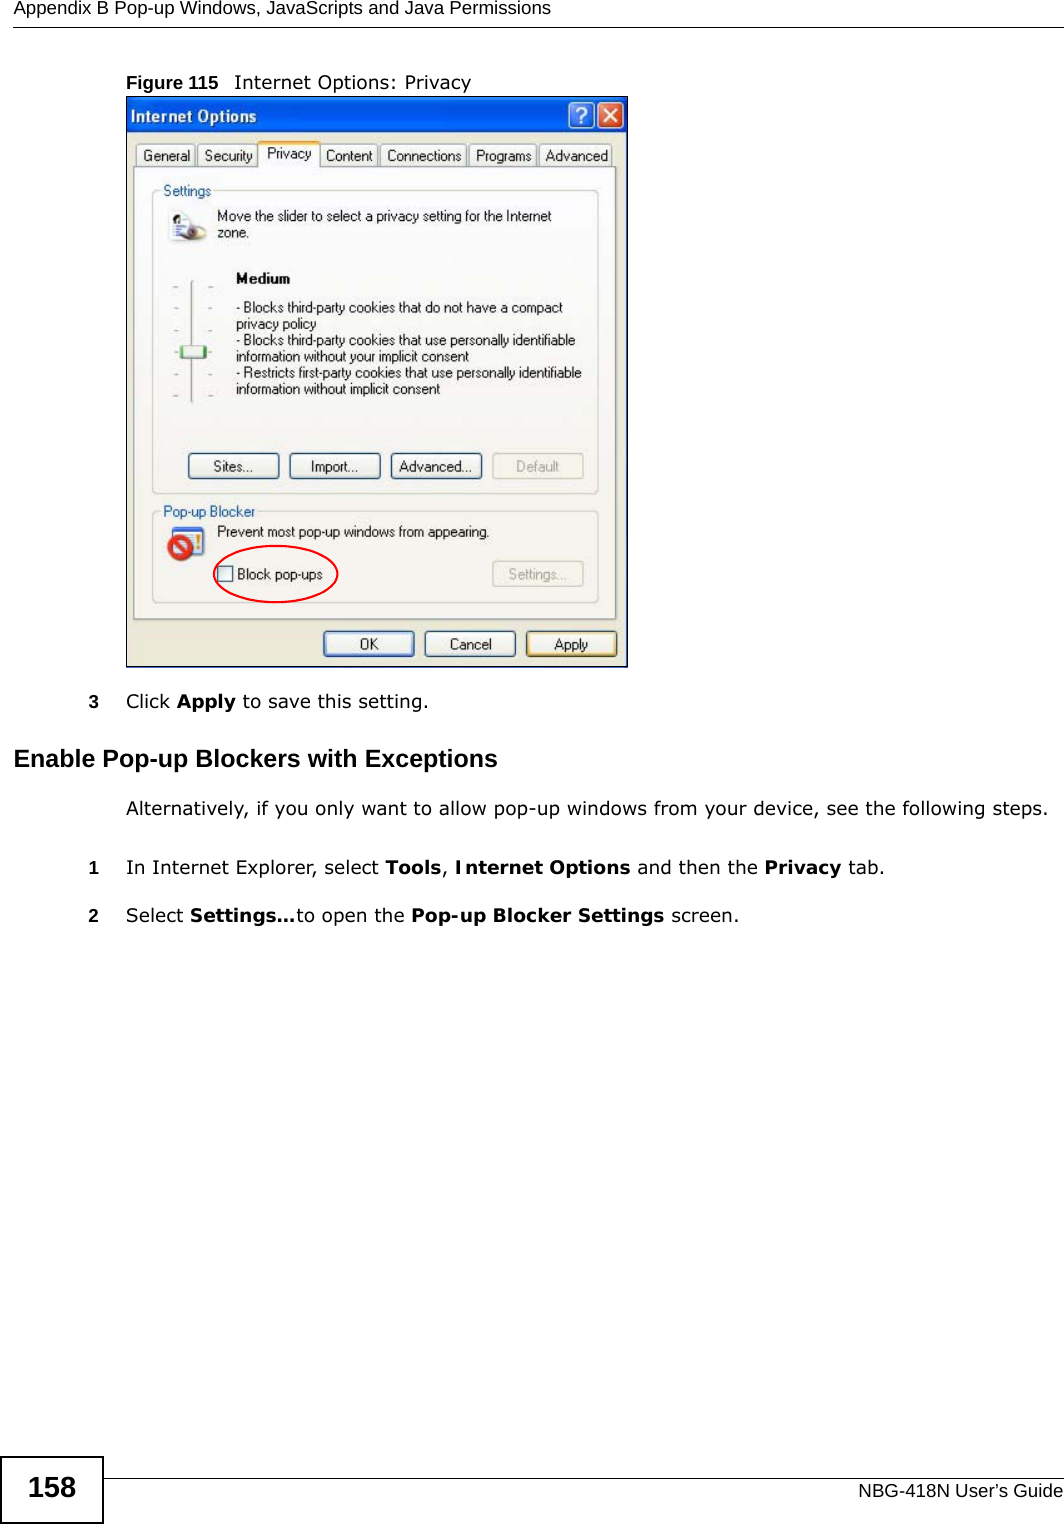 Appendix B Pop-up Windows, JavaScripts and Java PermissionsNBG-418N User’s Guide158Figure 115   Internet Options: Privacy3Click Apply to save this setting.Enable Pop-up Blockers with ExceptionsAlternatively, if you only want to allow pop-up windows from your device, see the following steps.1In Internet Explorer, select Tools, Internet Options and then the Privacy tab. 2Select Settings…to open the Pop-up Blocker Settings screen.